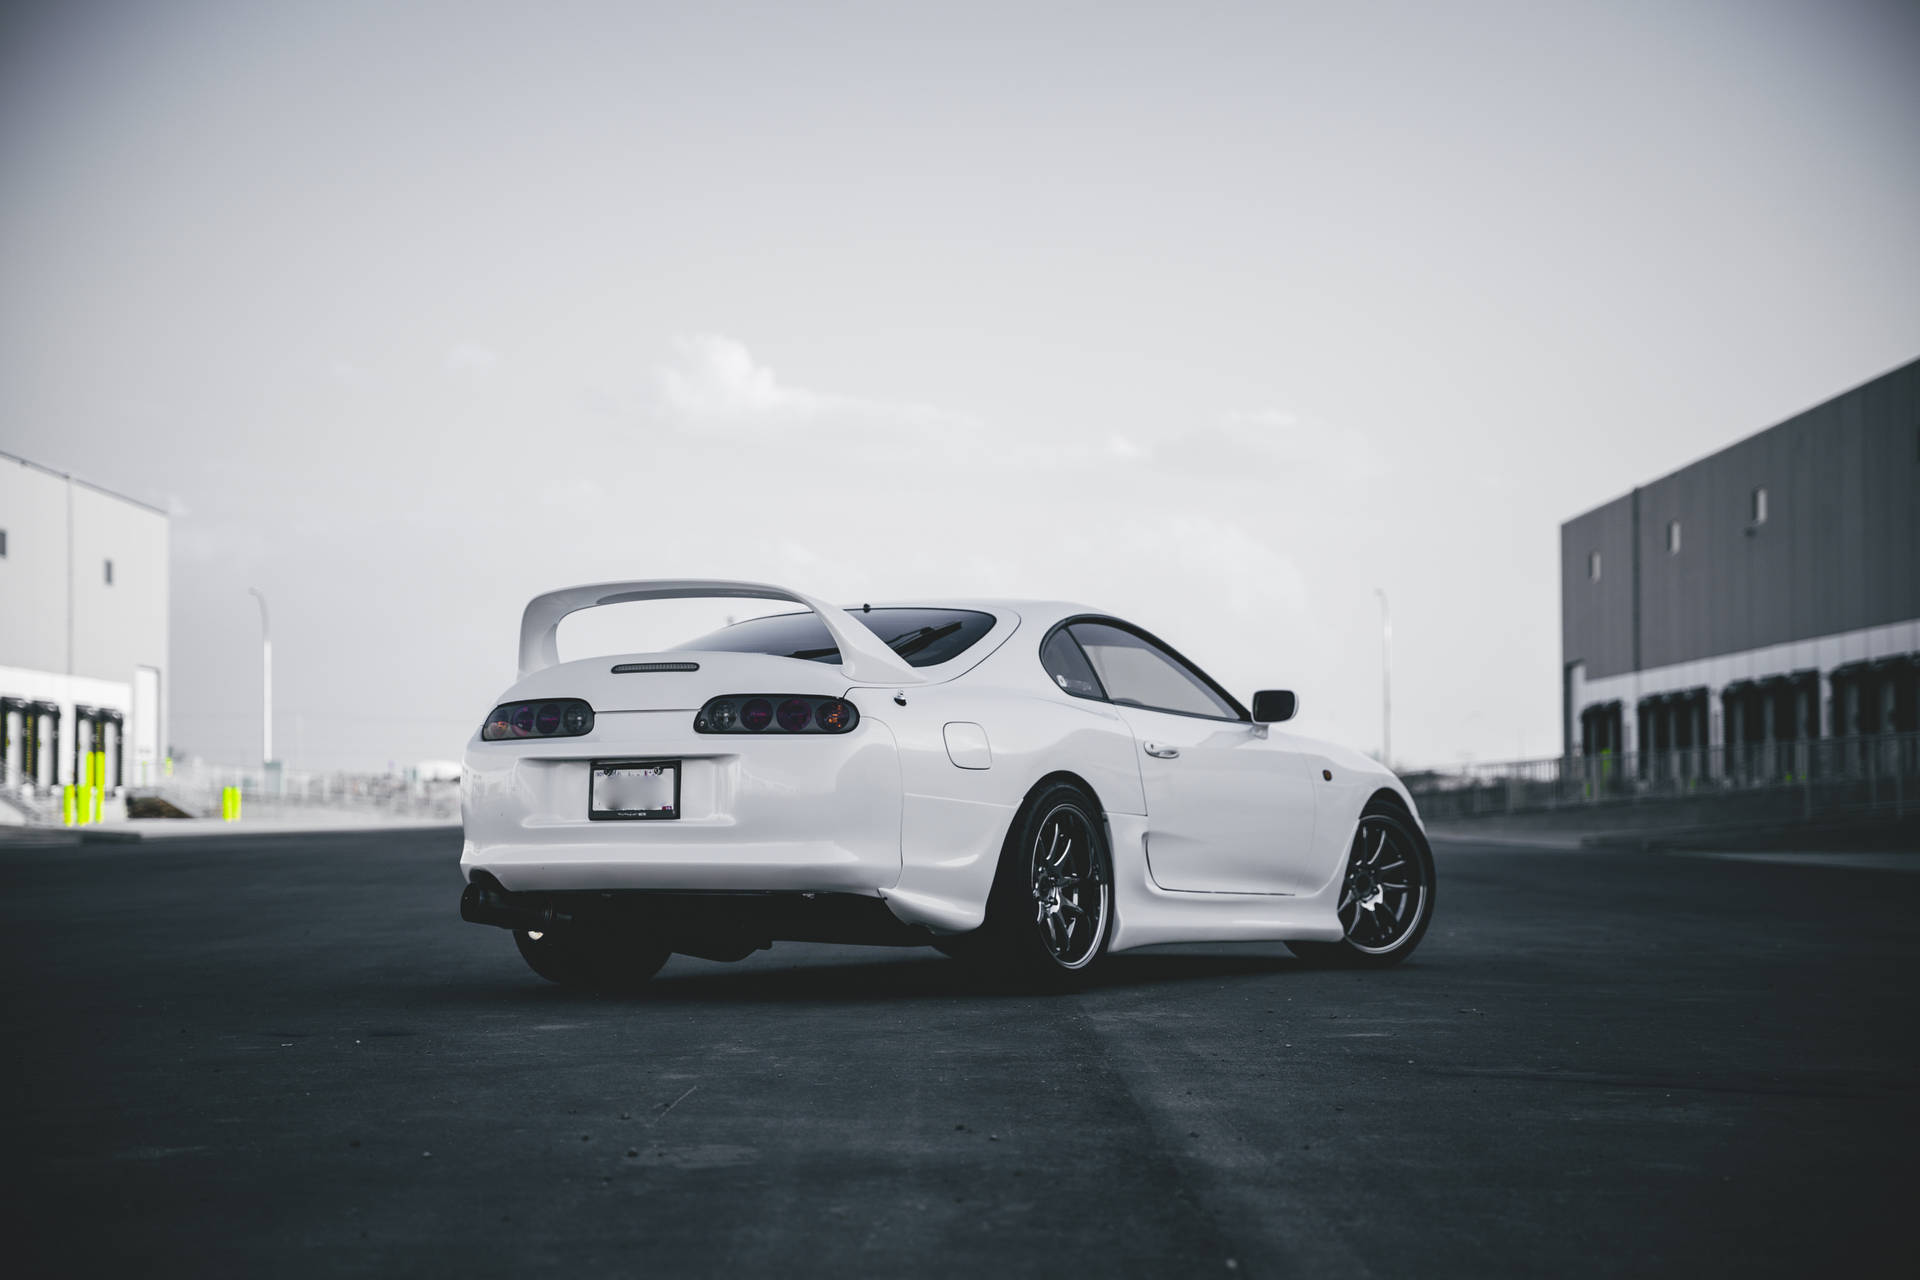 6240X4160 Jdm Wallpaper and Background